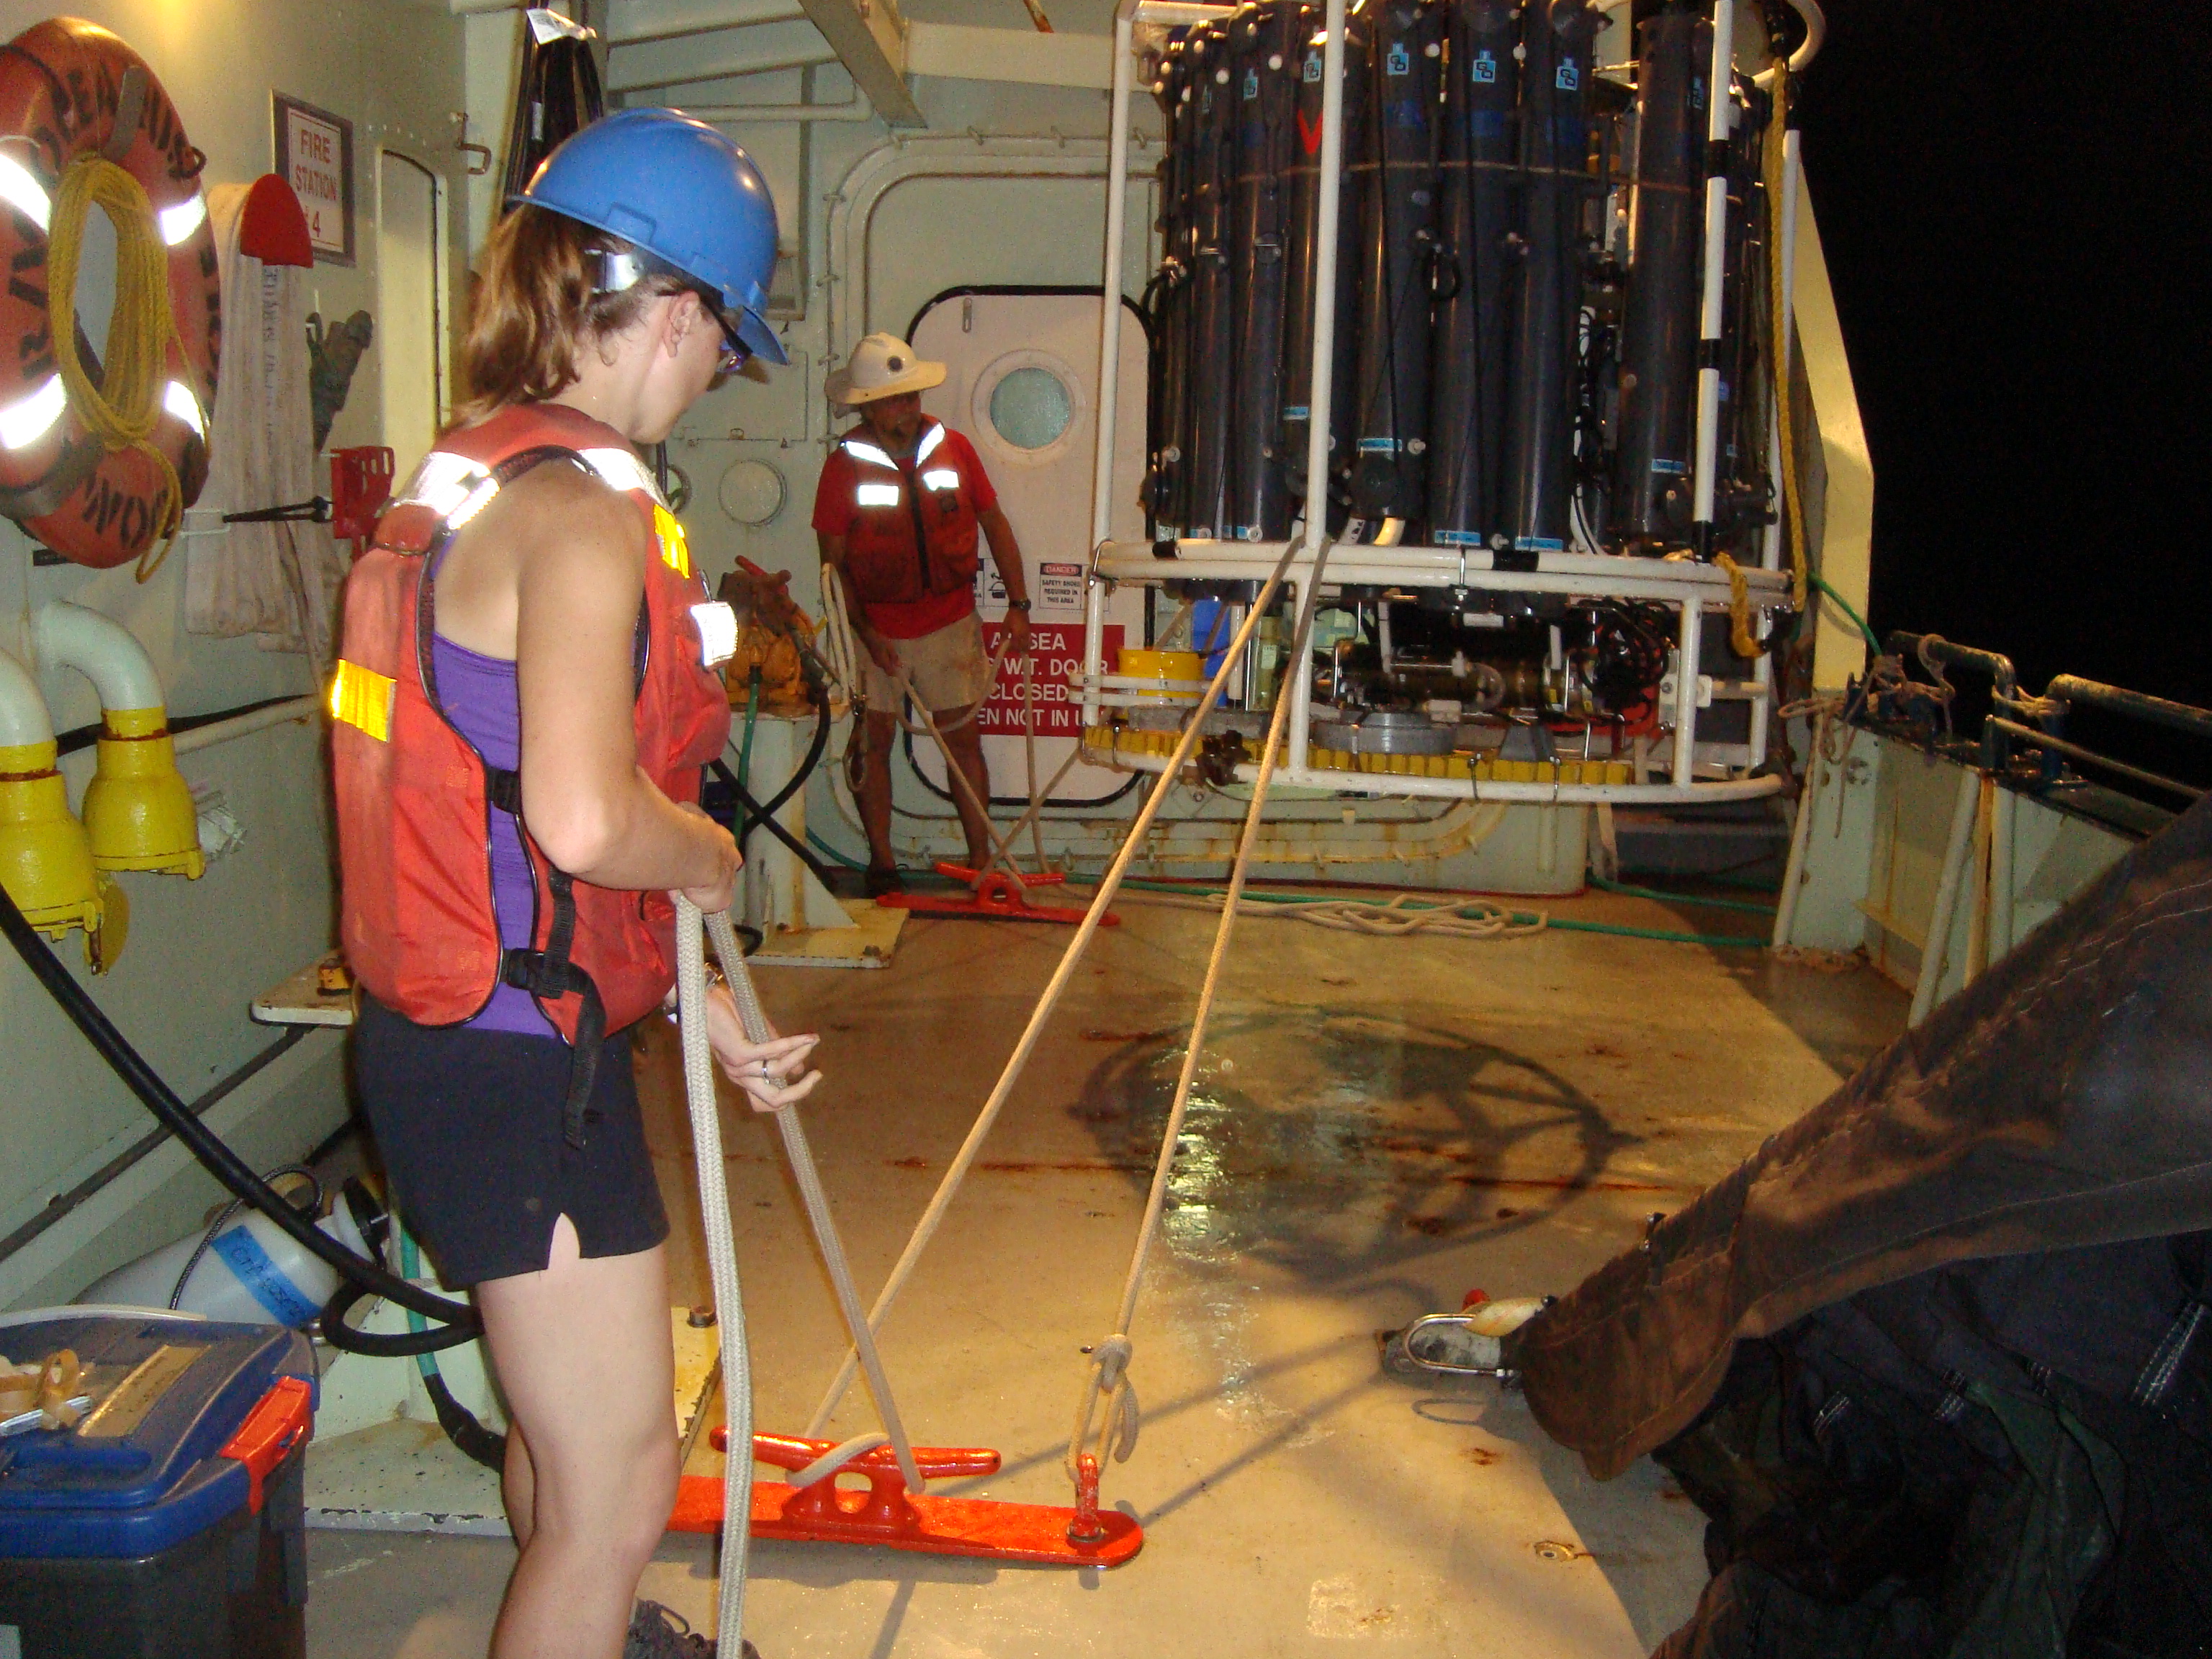 Kelsey Poulson-Ellestad, a former graduate student at the Georgia Institute of Technology, now at Woods Hole Oceanographic Institution, works with a Conductivity, temperature and depth (CTD) sampling rosette, which is lowered over the side of a vessel and is used tocollect water samples from various depths. Credit: Kelsey Poulson-Ellestad.